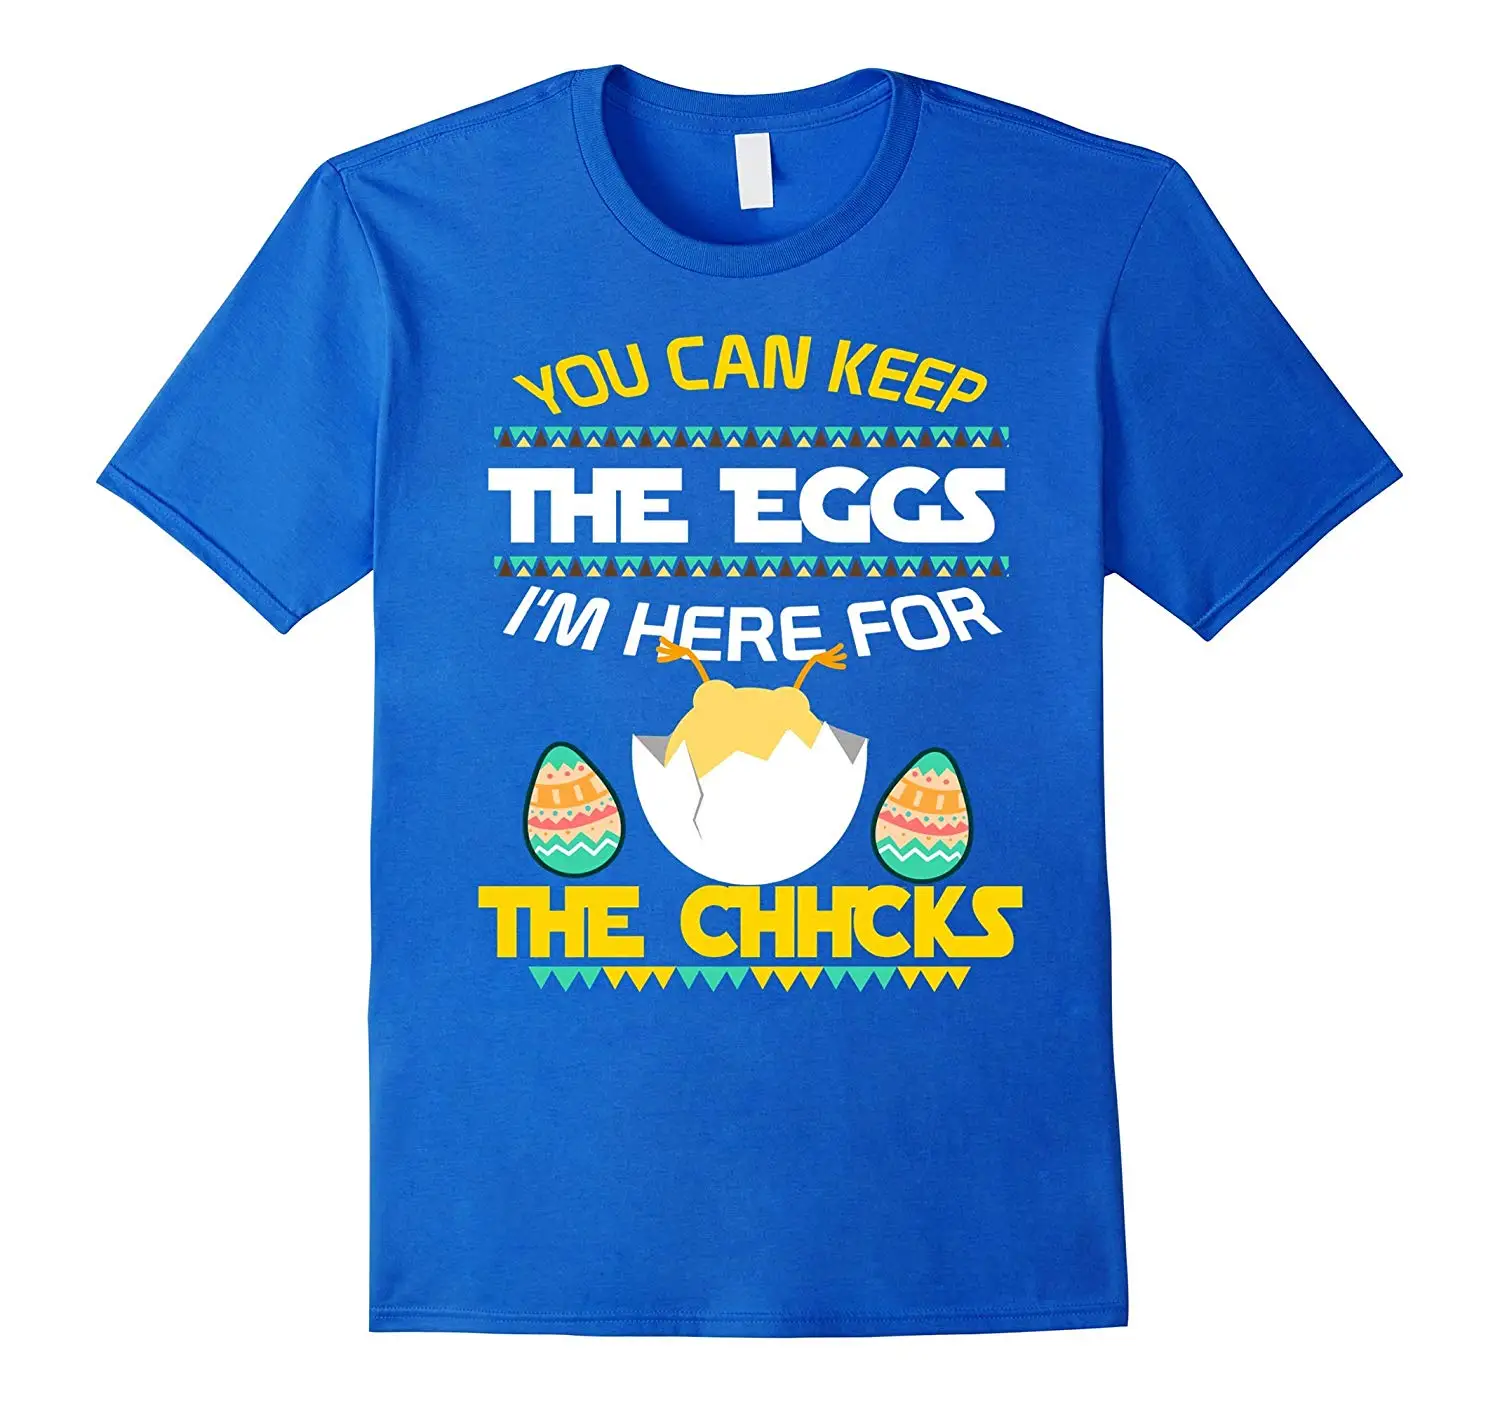 

You Can Keep The Eggs I'm Here for The Chhcks. Funny Easter T-Shirt Summer Cotton Short Sleeve O-Neck Men's T Shirt New S-3XL